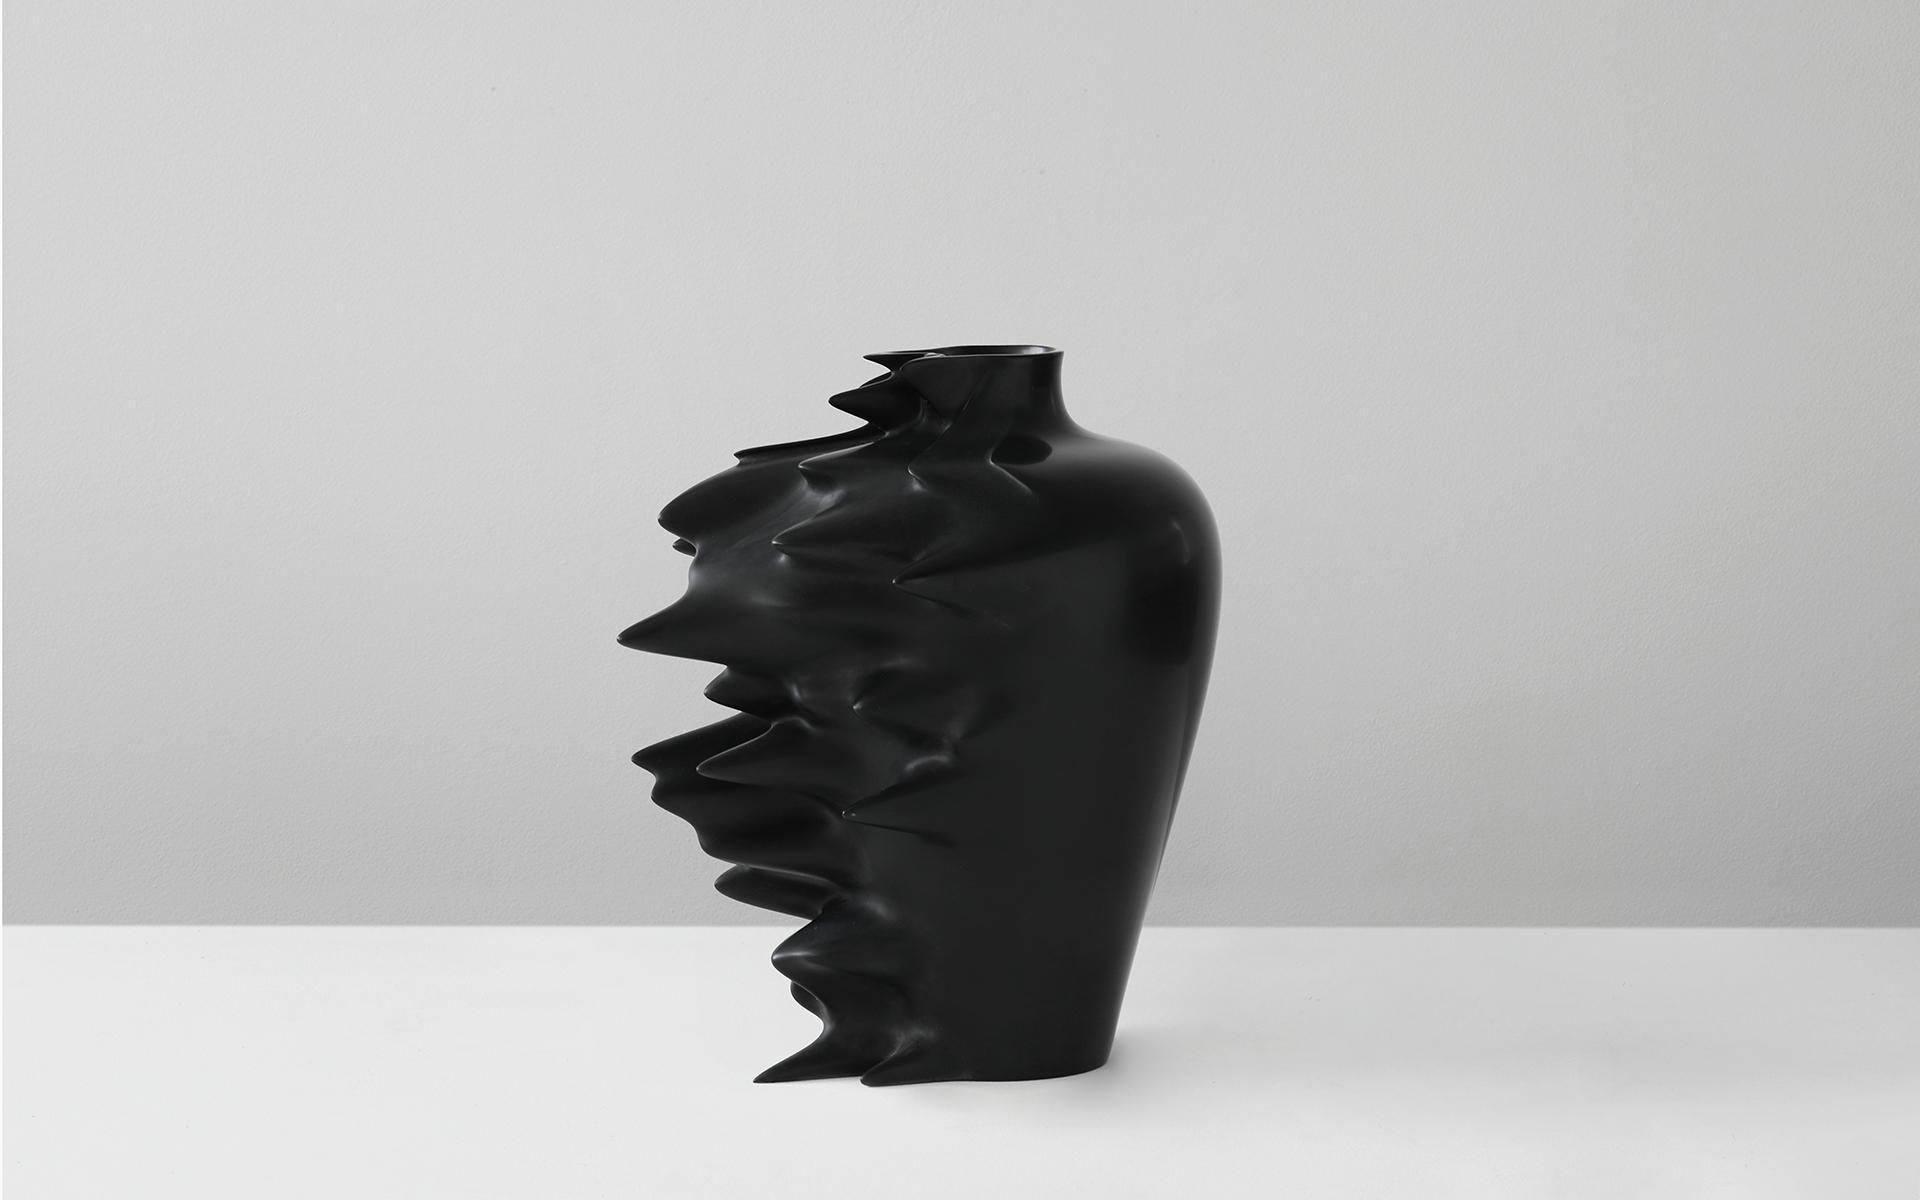 The archetype of a Ming vase frozen in digital acceleration.
These vases are available in two different colors of Corian: White “Glacier” and black “Nocturne”.

Fast is part of the À L’Origine collection created by YMER&MALTA Studio. A l’Origine